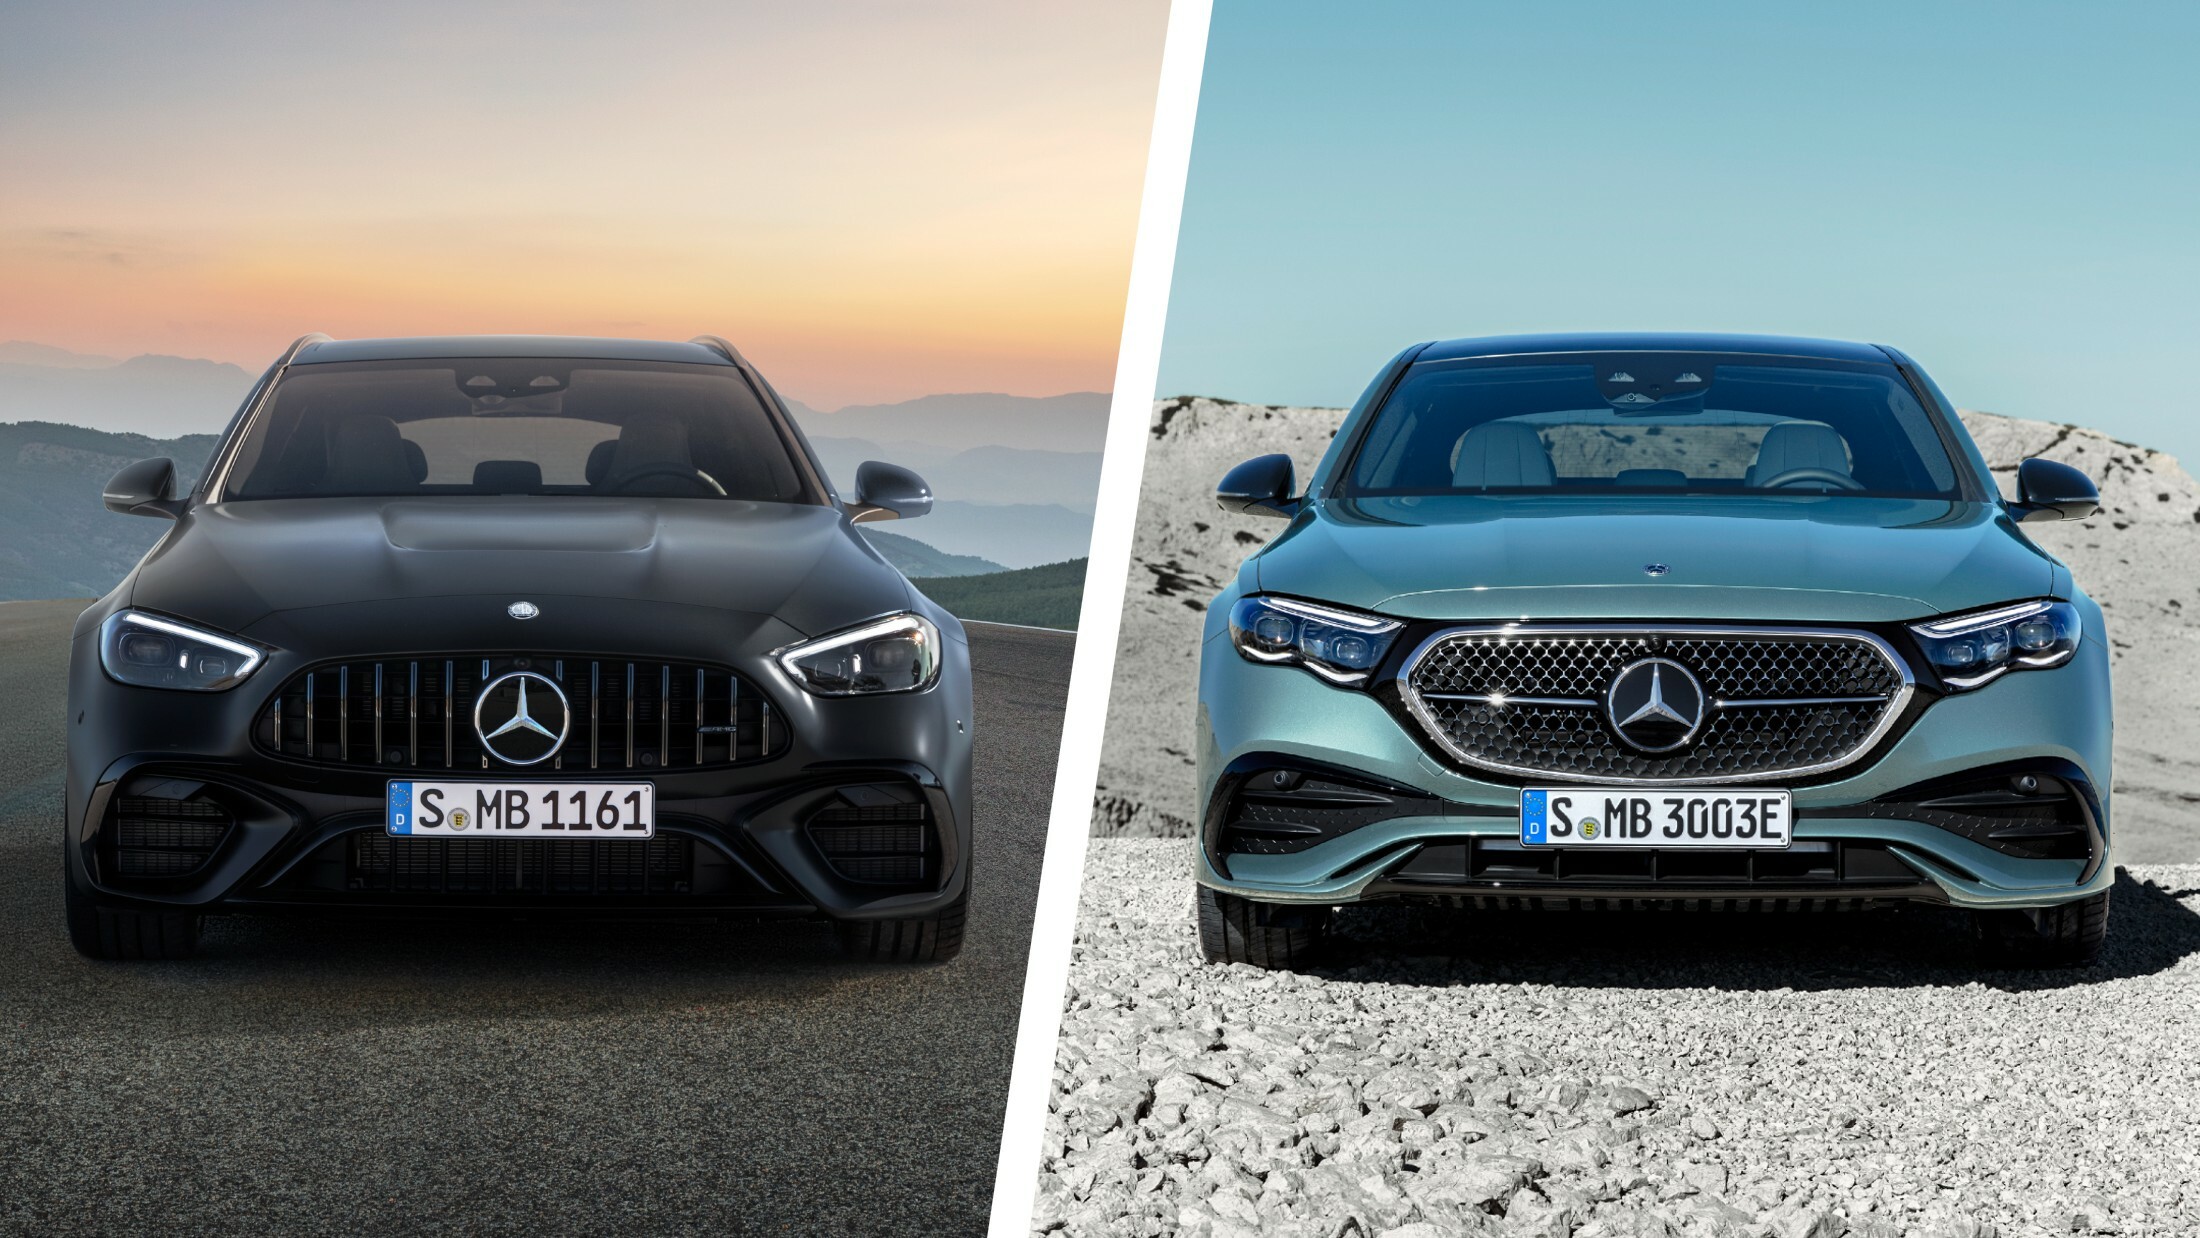 Mercedes-AMG Final Editions to see off V8 models 